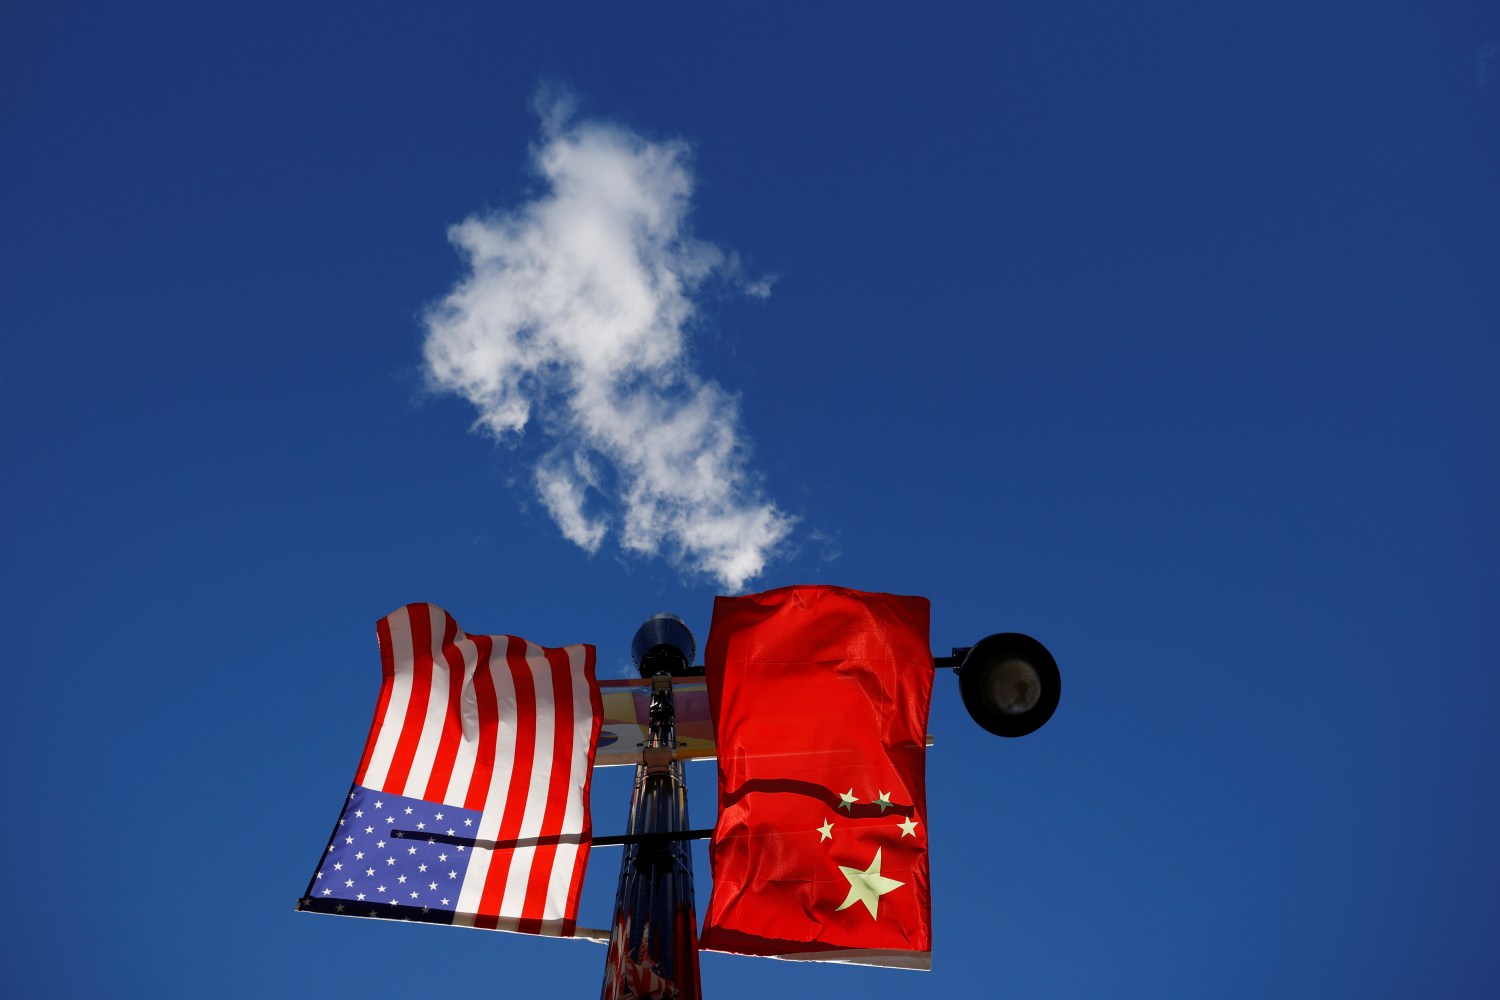 The flags of the United States and China fly from a lamppost in the Chinatown neighborhood of Boston, Massachusetts, U.S., November 1, 2021.   REUTERS/Brian Snyder